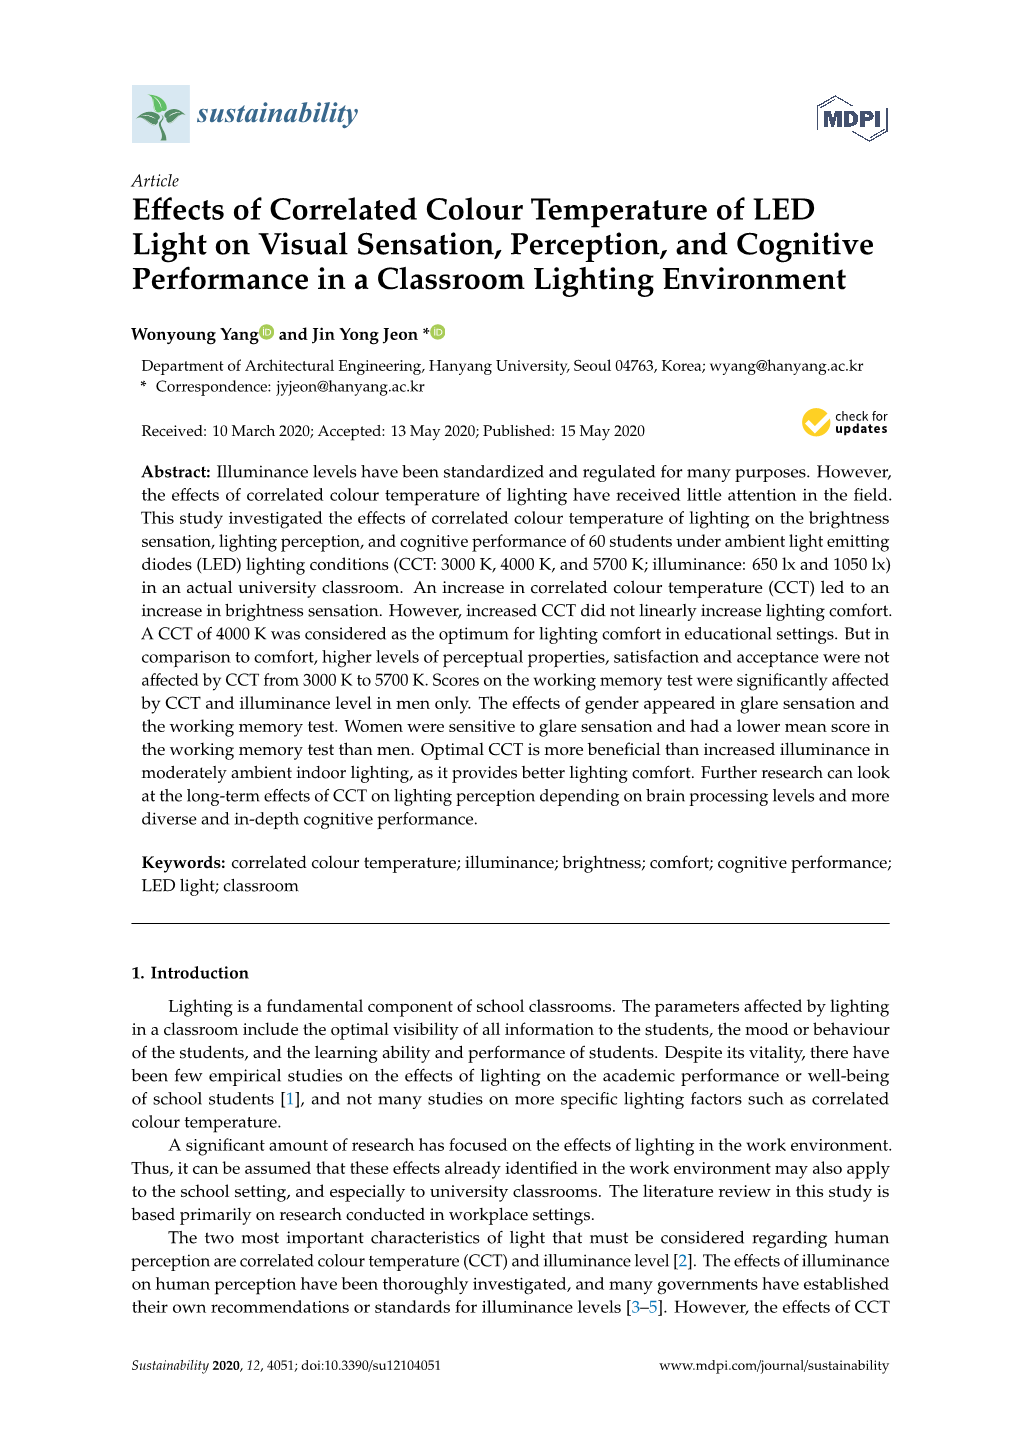 Effects of Correlated Colour Temperature of LED Light on Visual